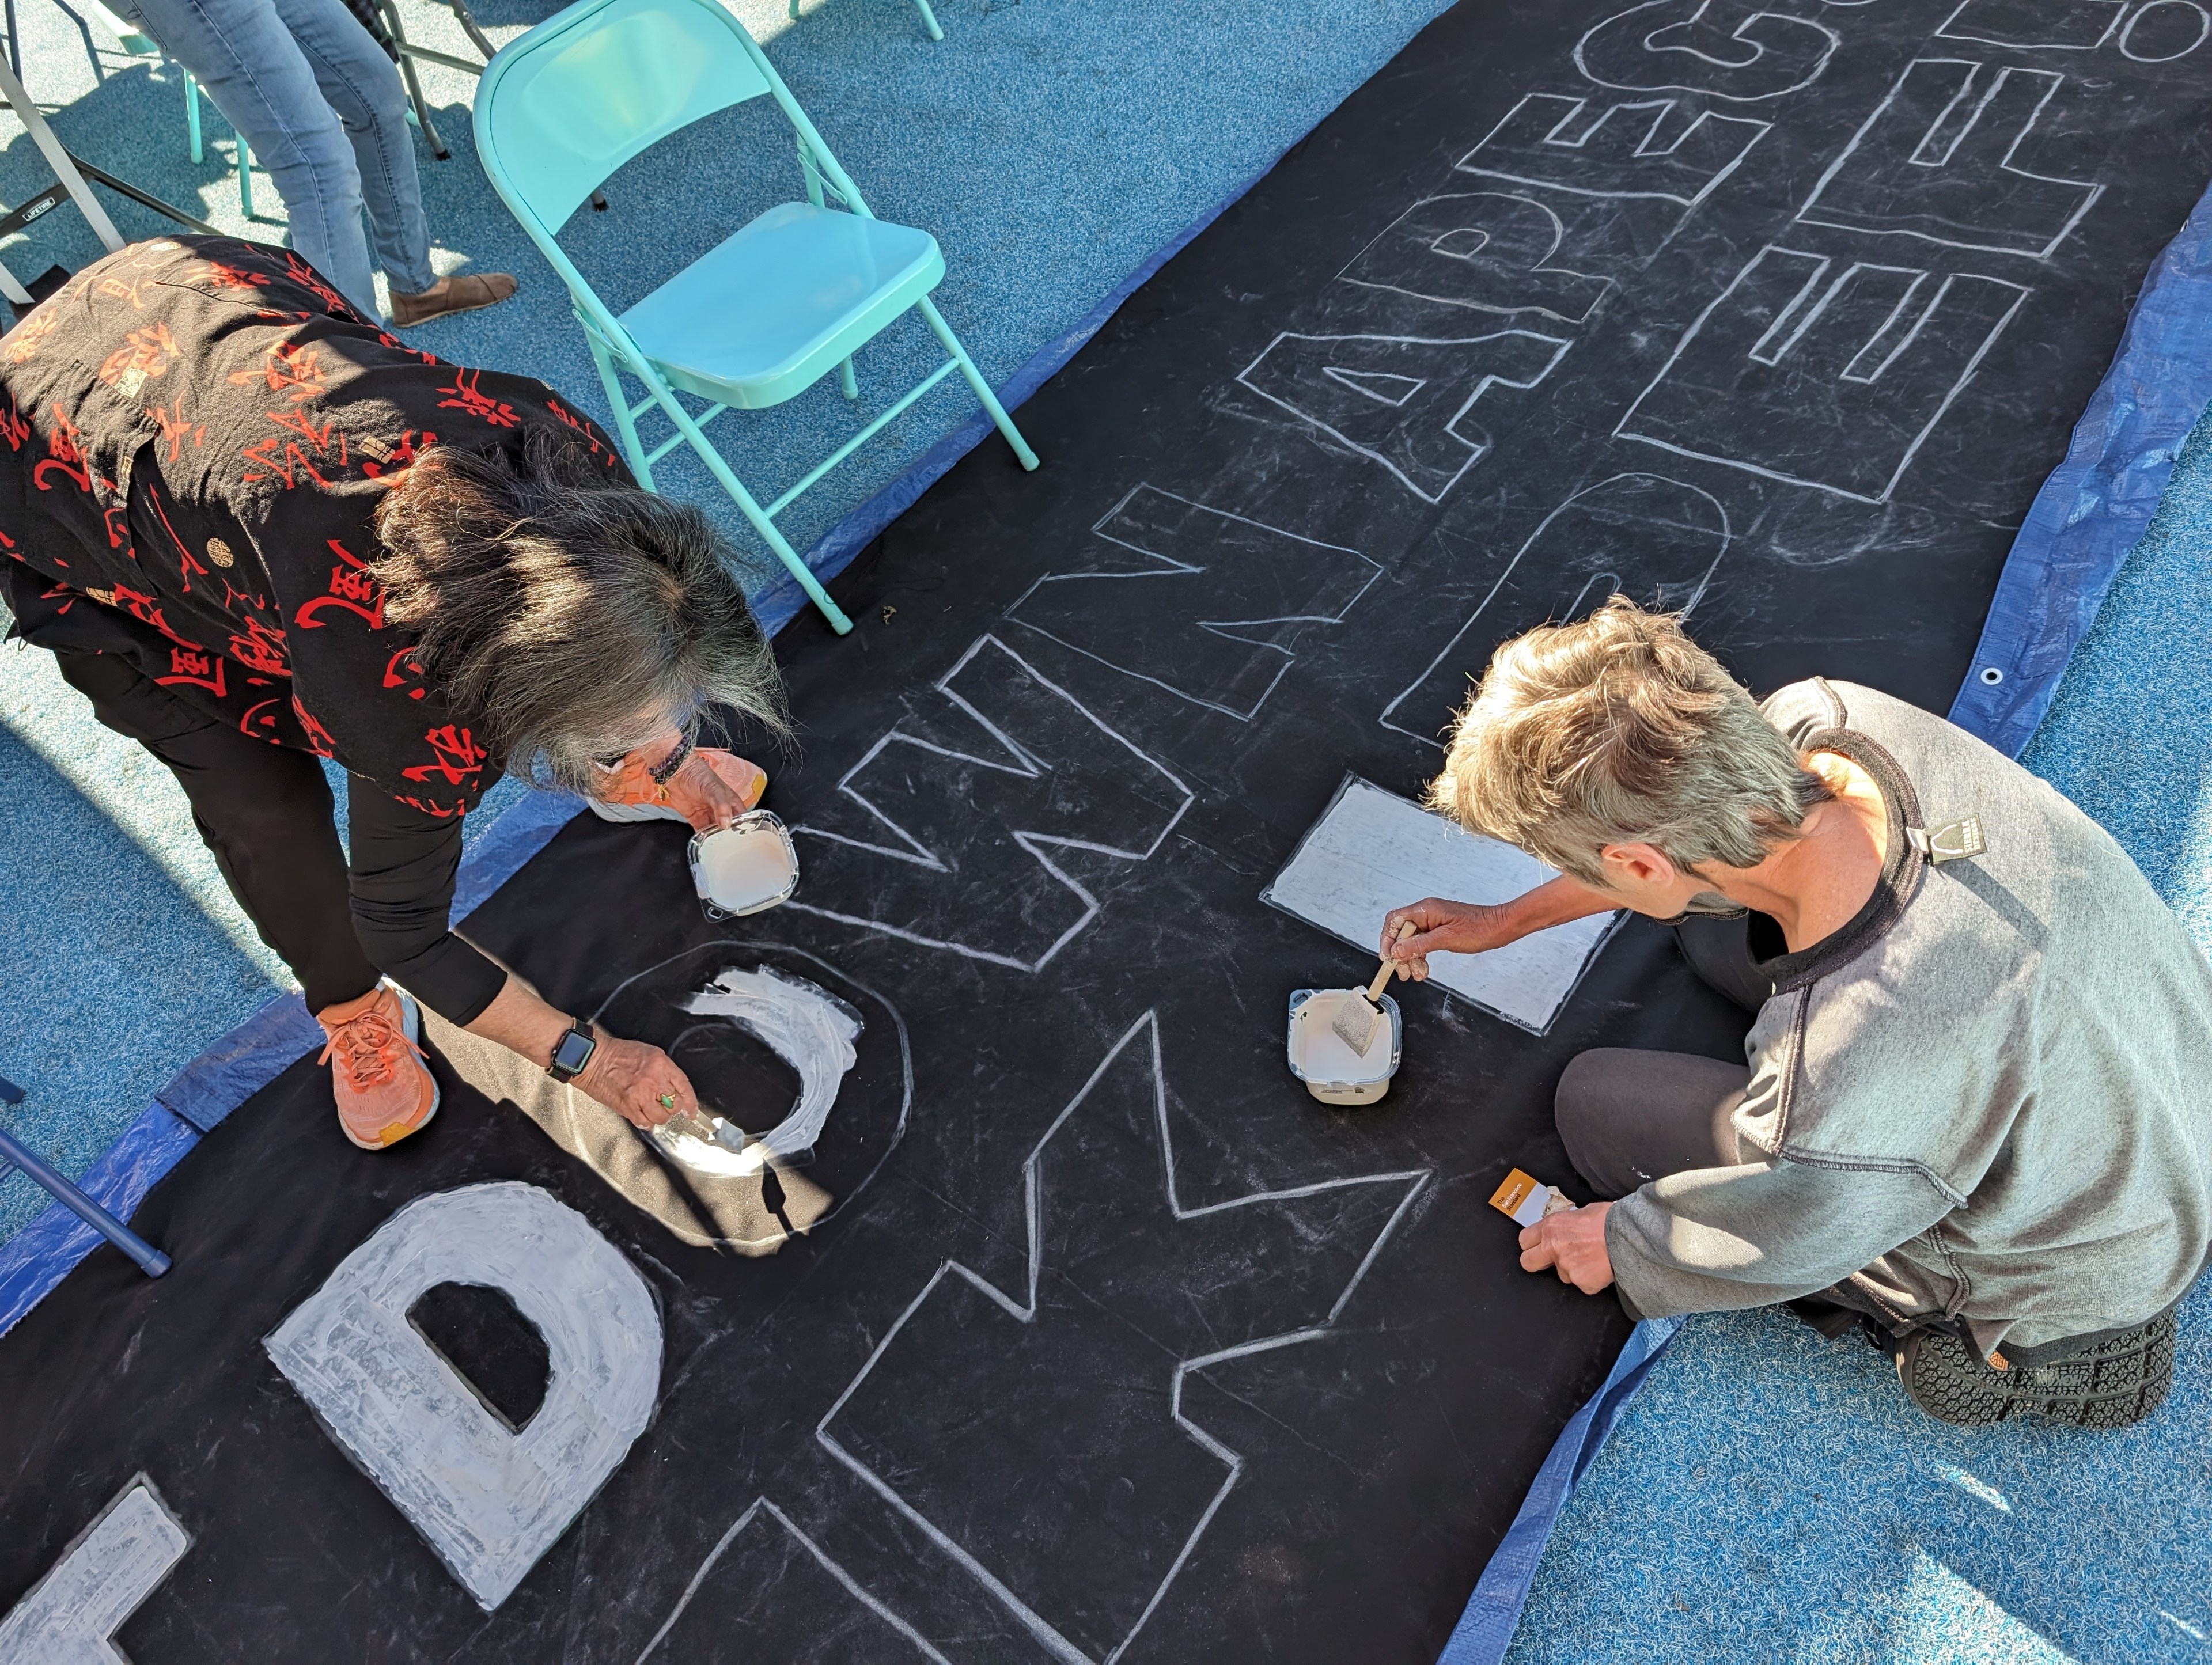 Pam Tau Lee and Kathe Burick paint letters on a "Shut down APEC" sign Sunday at a teach-in at Kawpa Gardens on Mission Street.